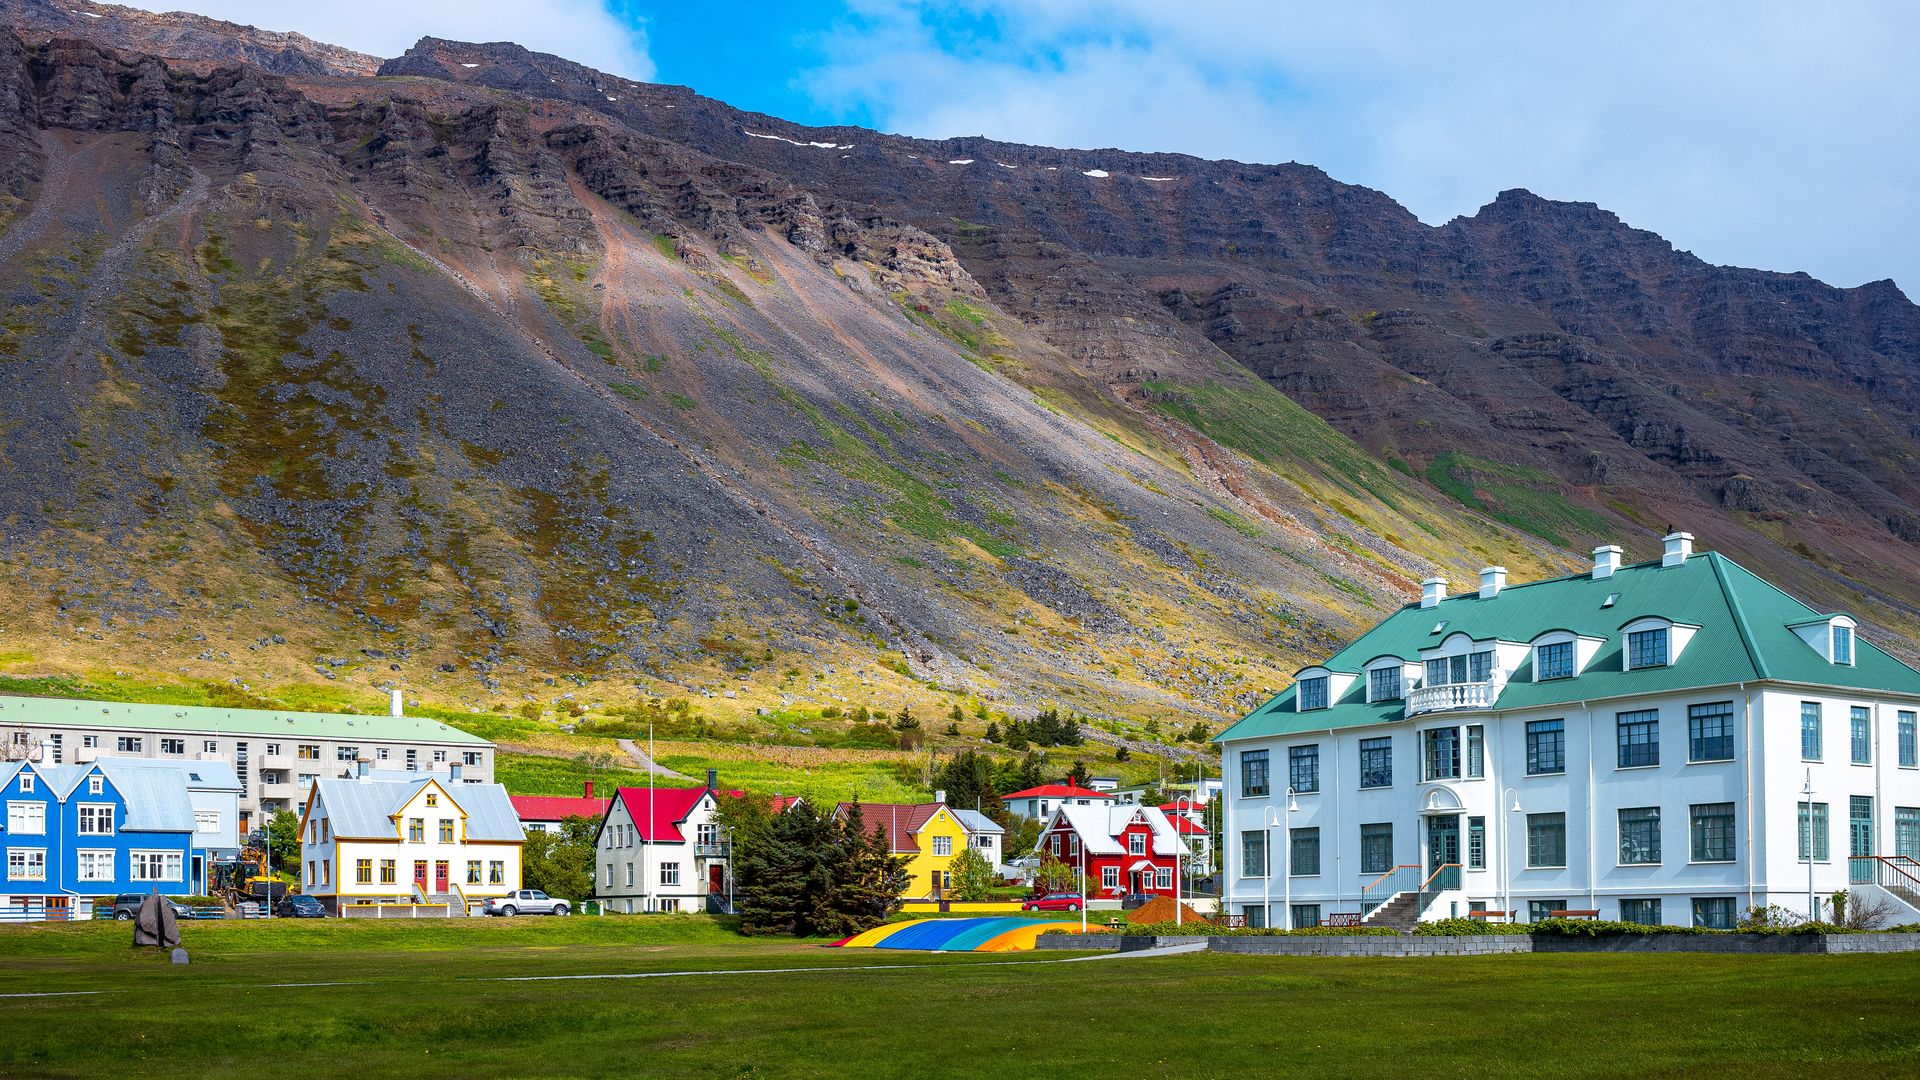 Photo of the town of Isafjordur in Iceland, where the climate is more temperate because of the influence of warm Gulf Stream current